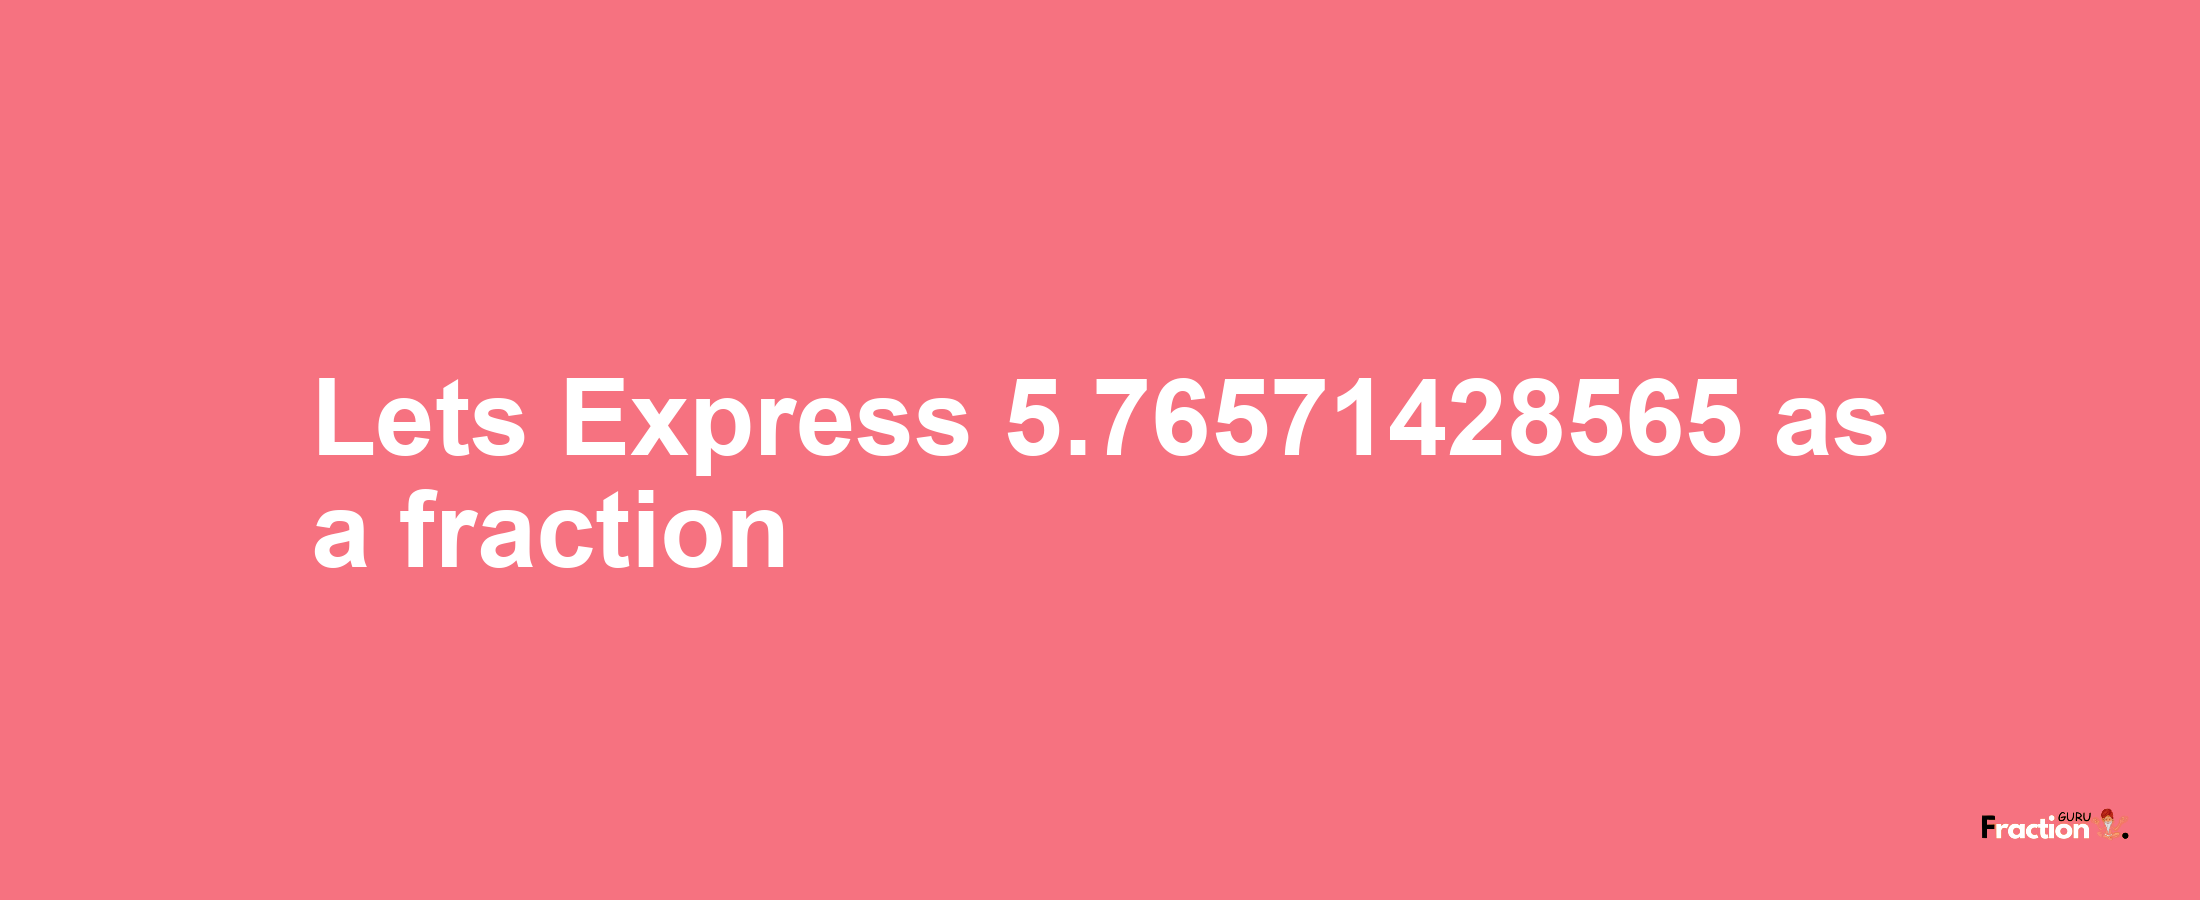 Lets Express 5.76571428565 as afraction